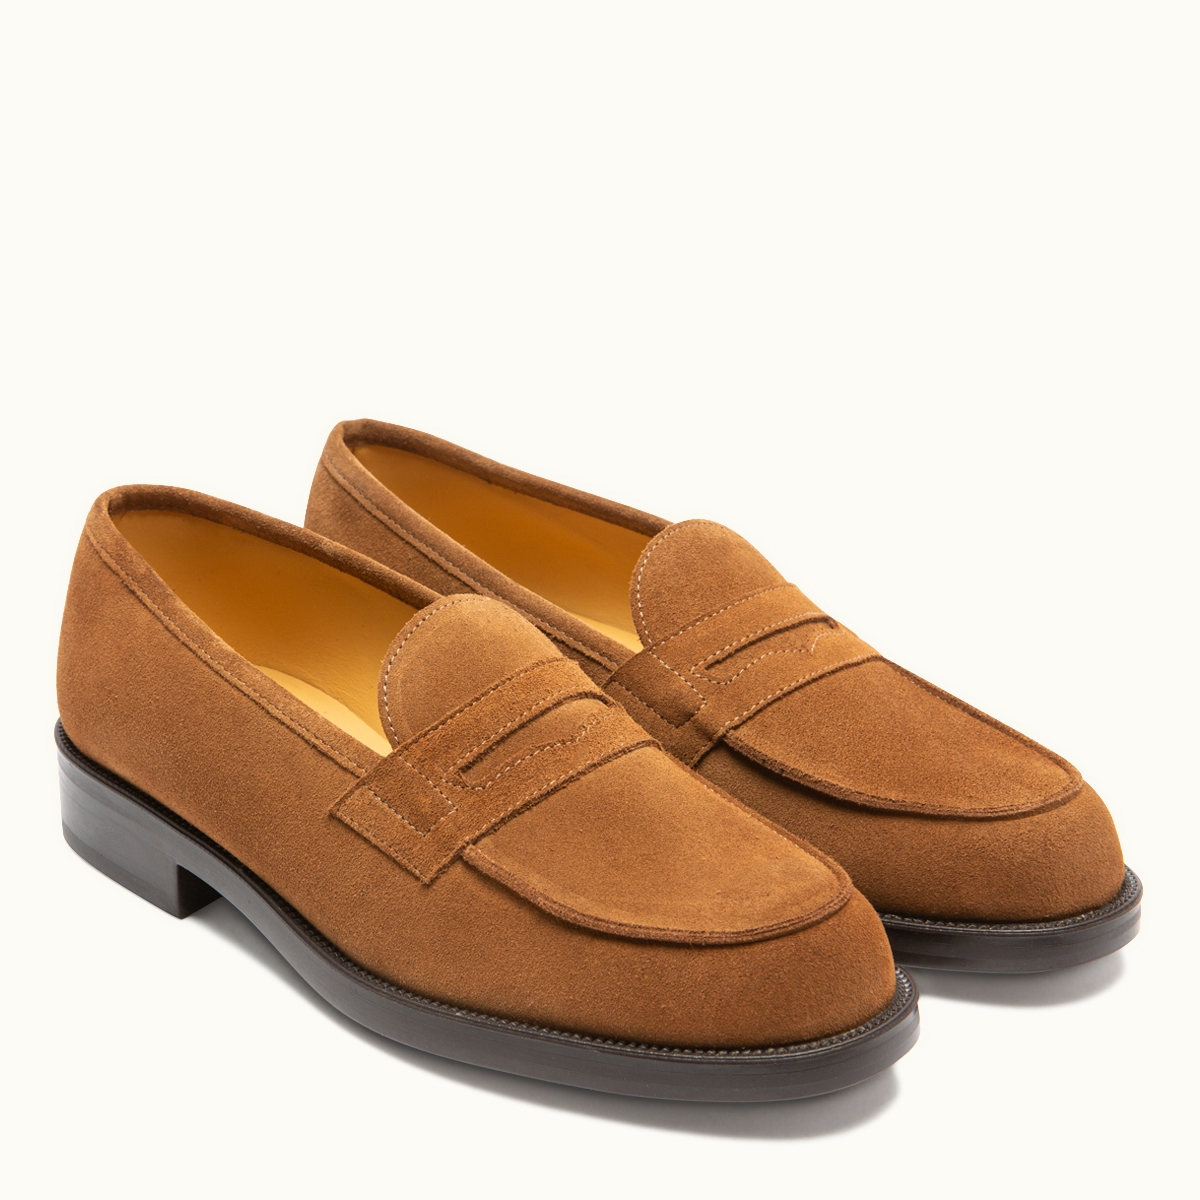 Men's Shoes | Shoes Made in France